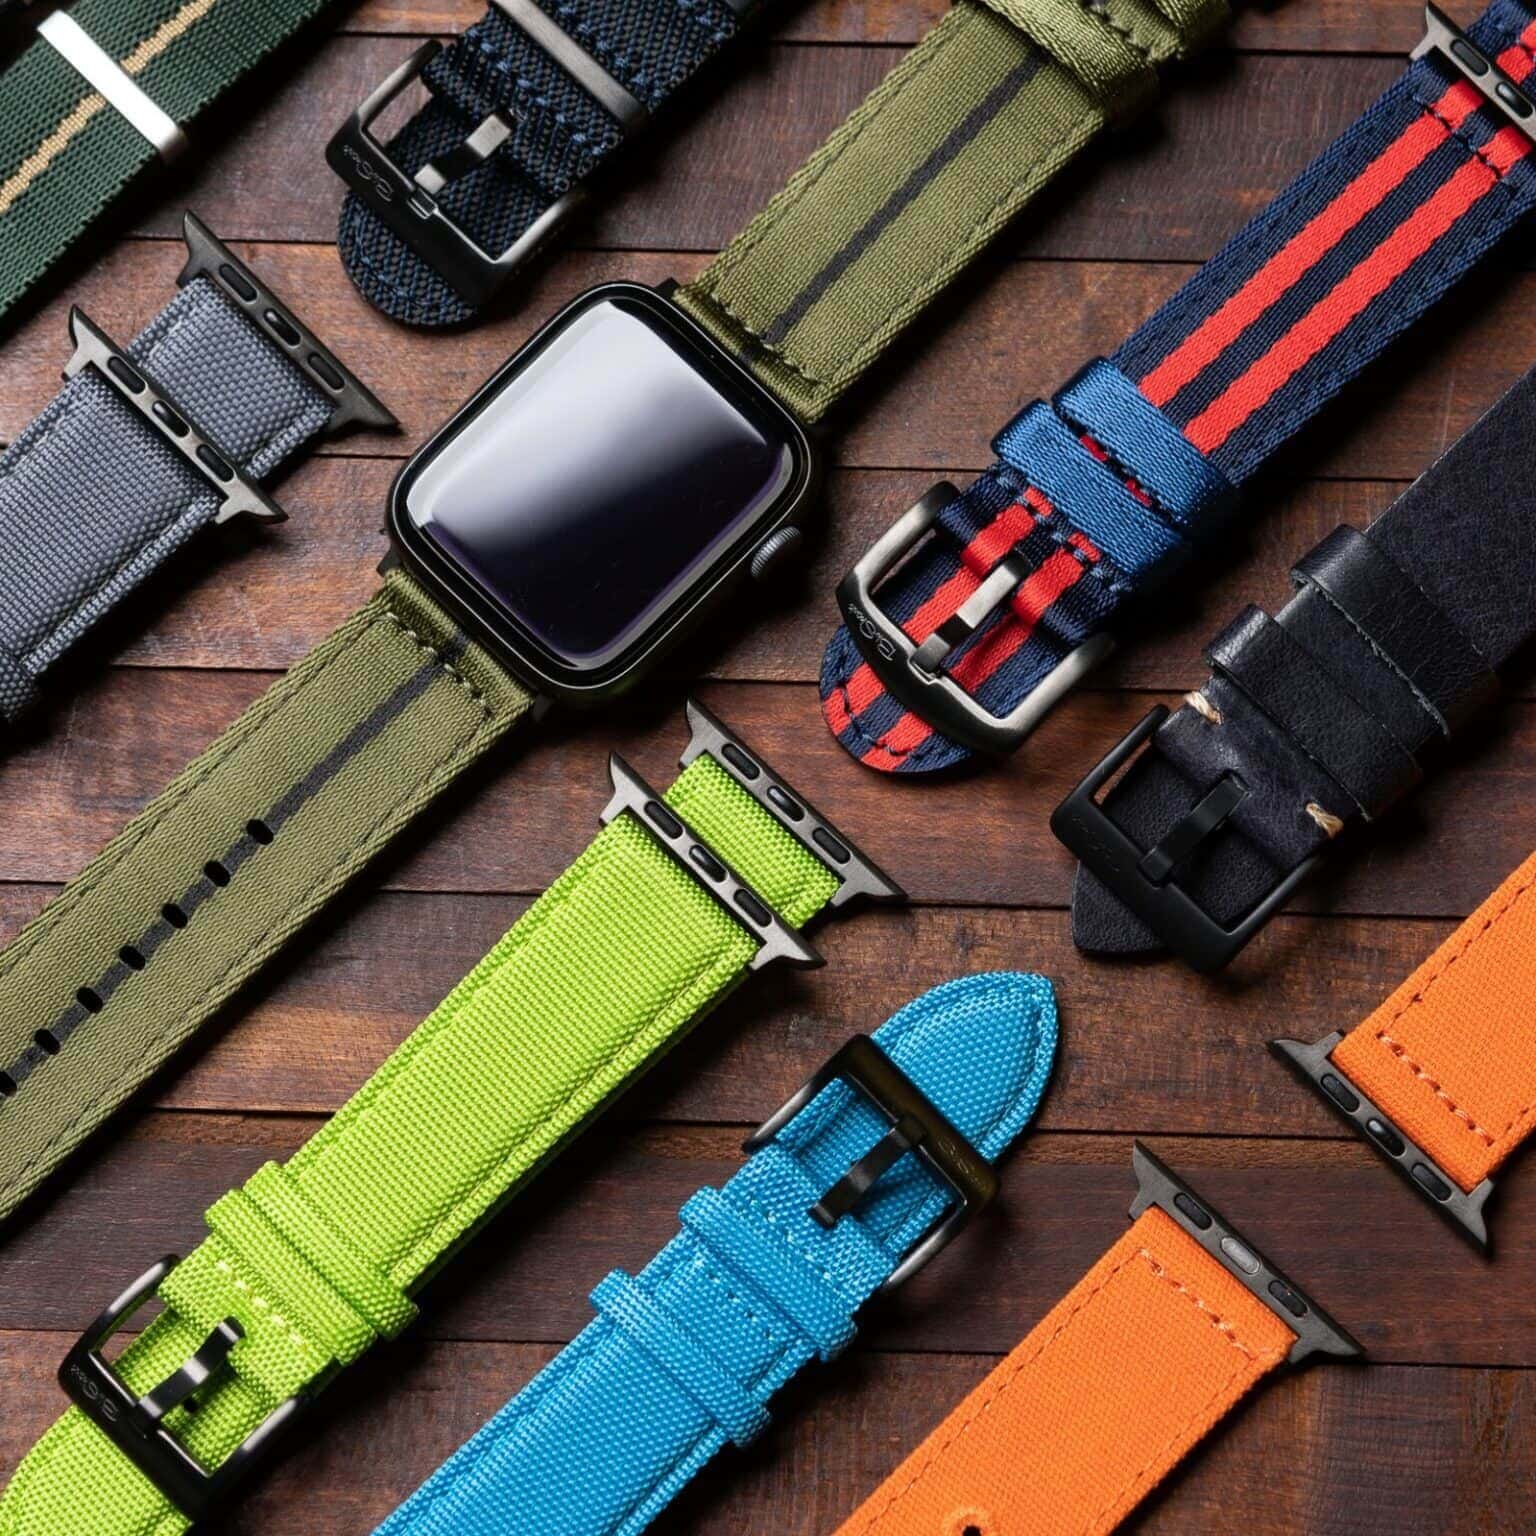 BluShark's Apple Watch bands come in a great variety of materials and colors.